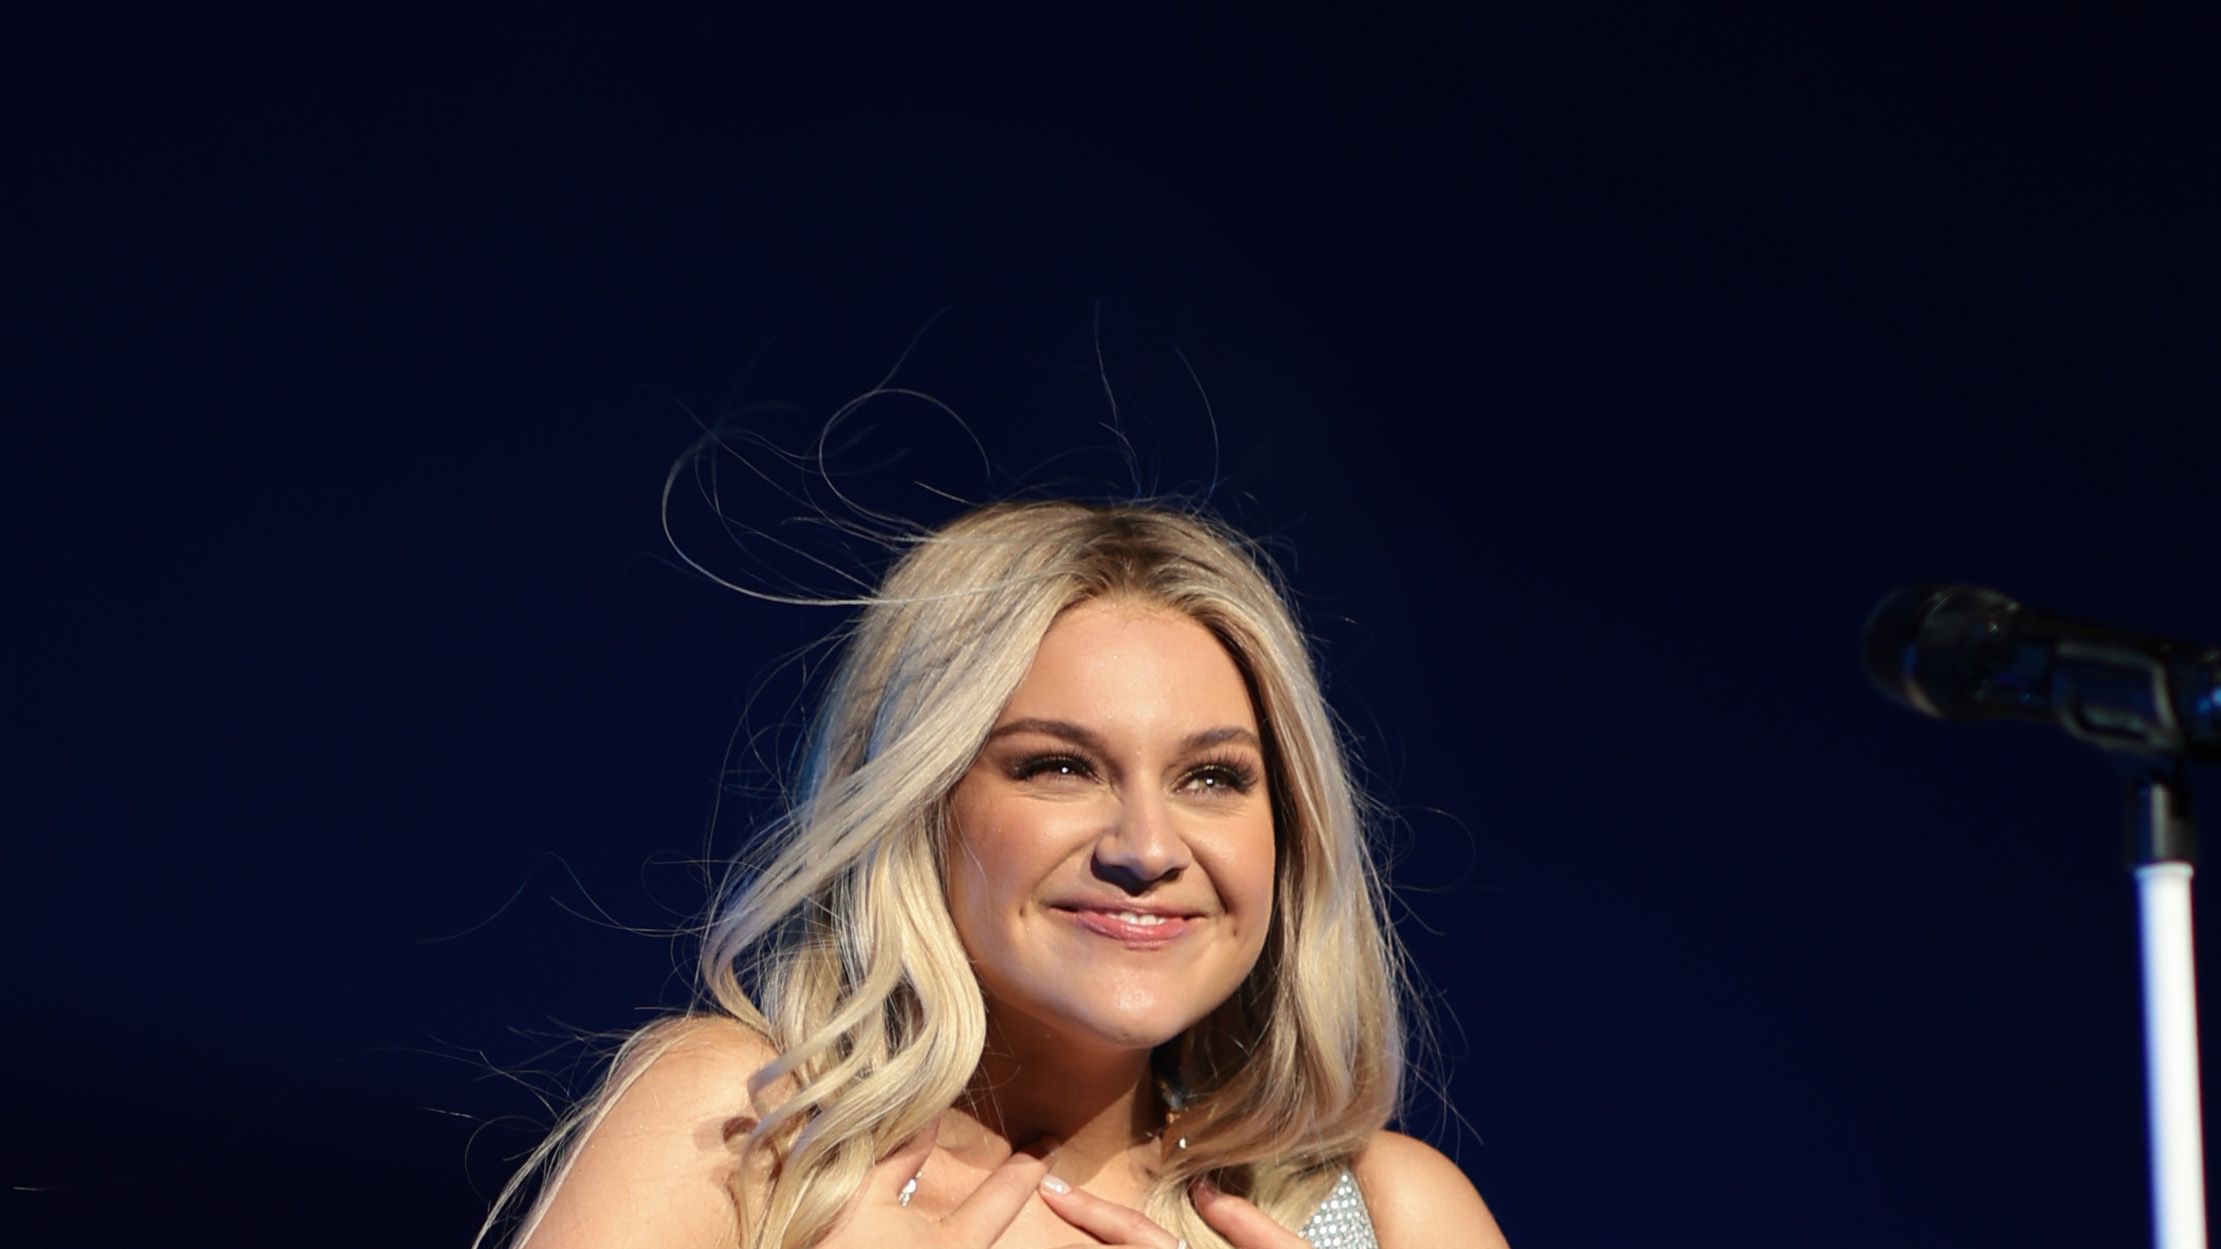 caprice francis recommends naked pictures of kelsea ballerini pic